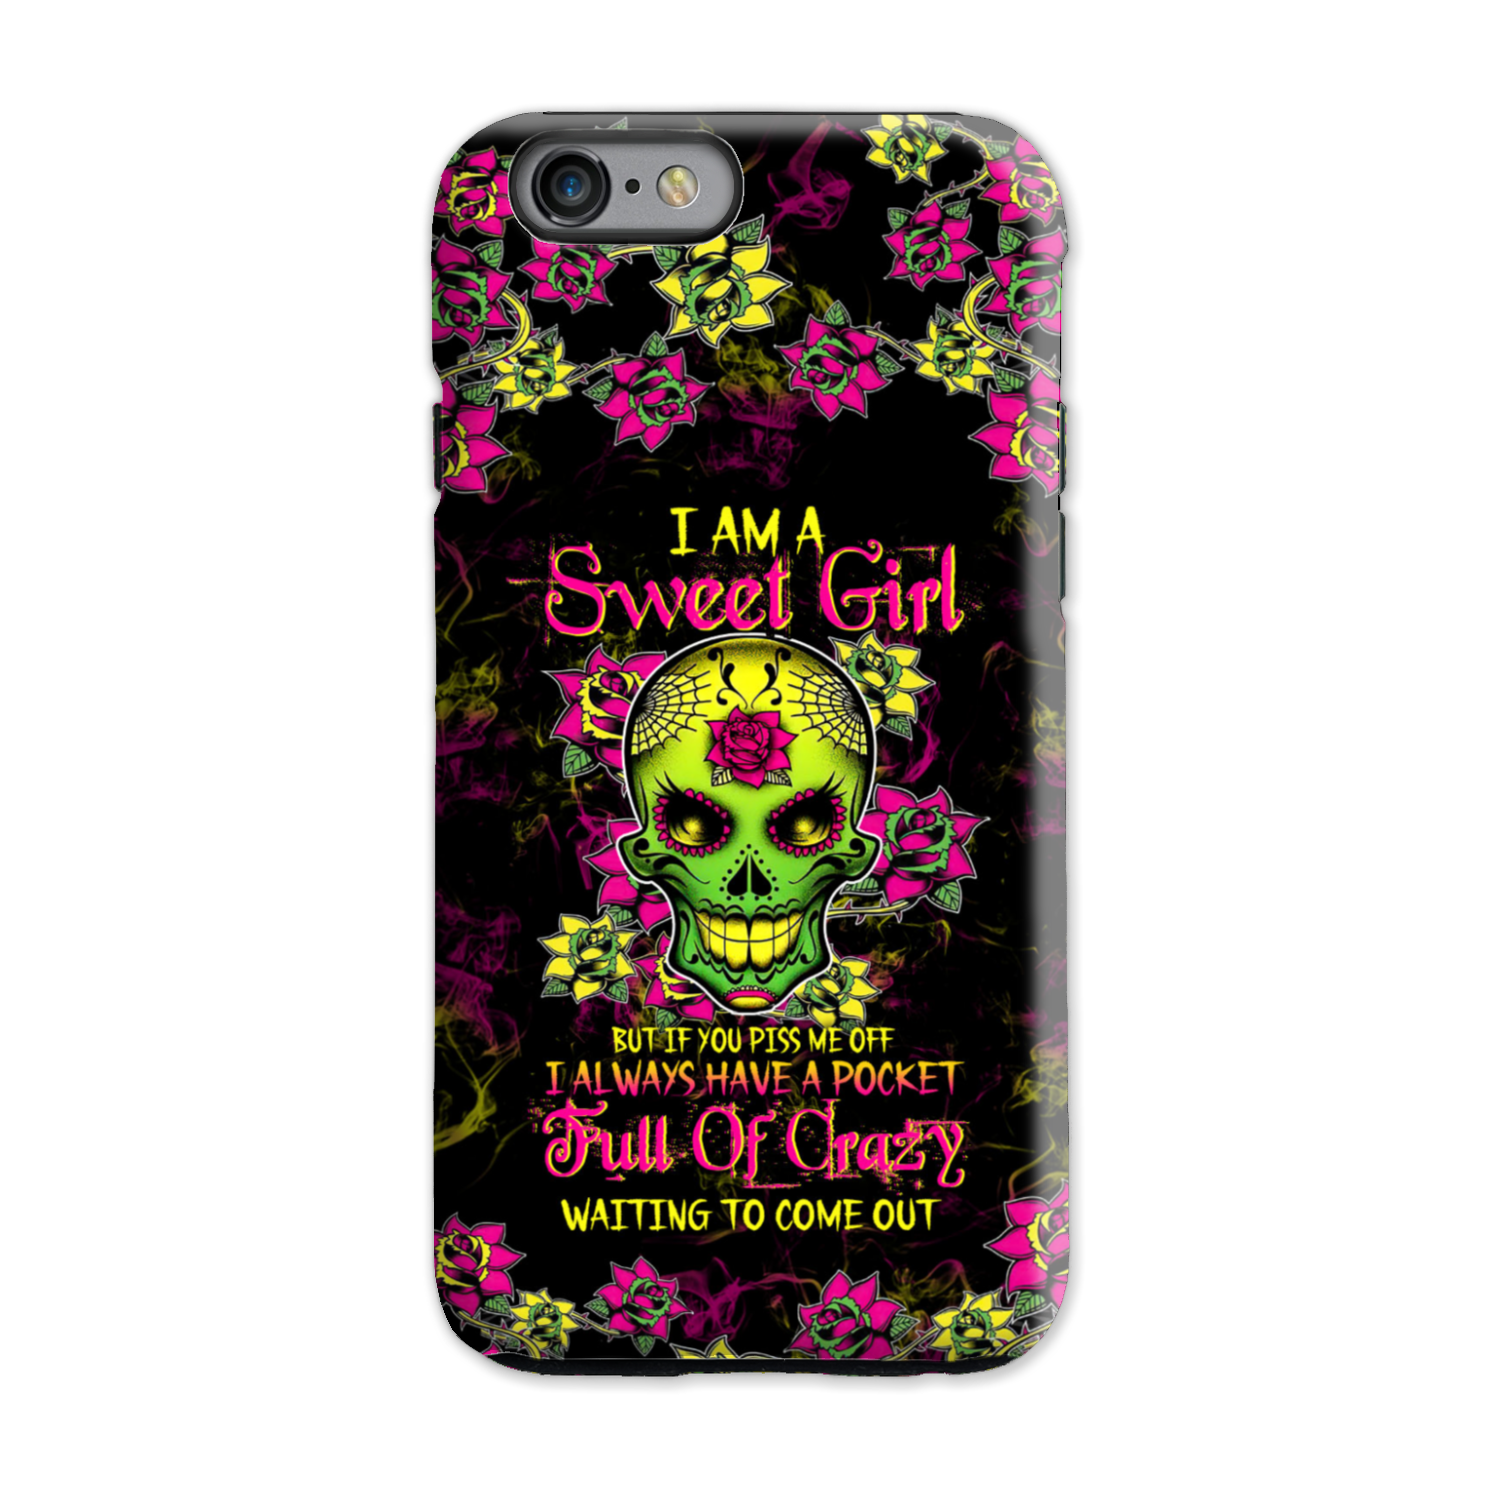 I AM A SWEET GIRL BUT IF YOU PISS ME OFF SUGAR SKULL PHONE CASE - TLTW1412224